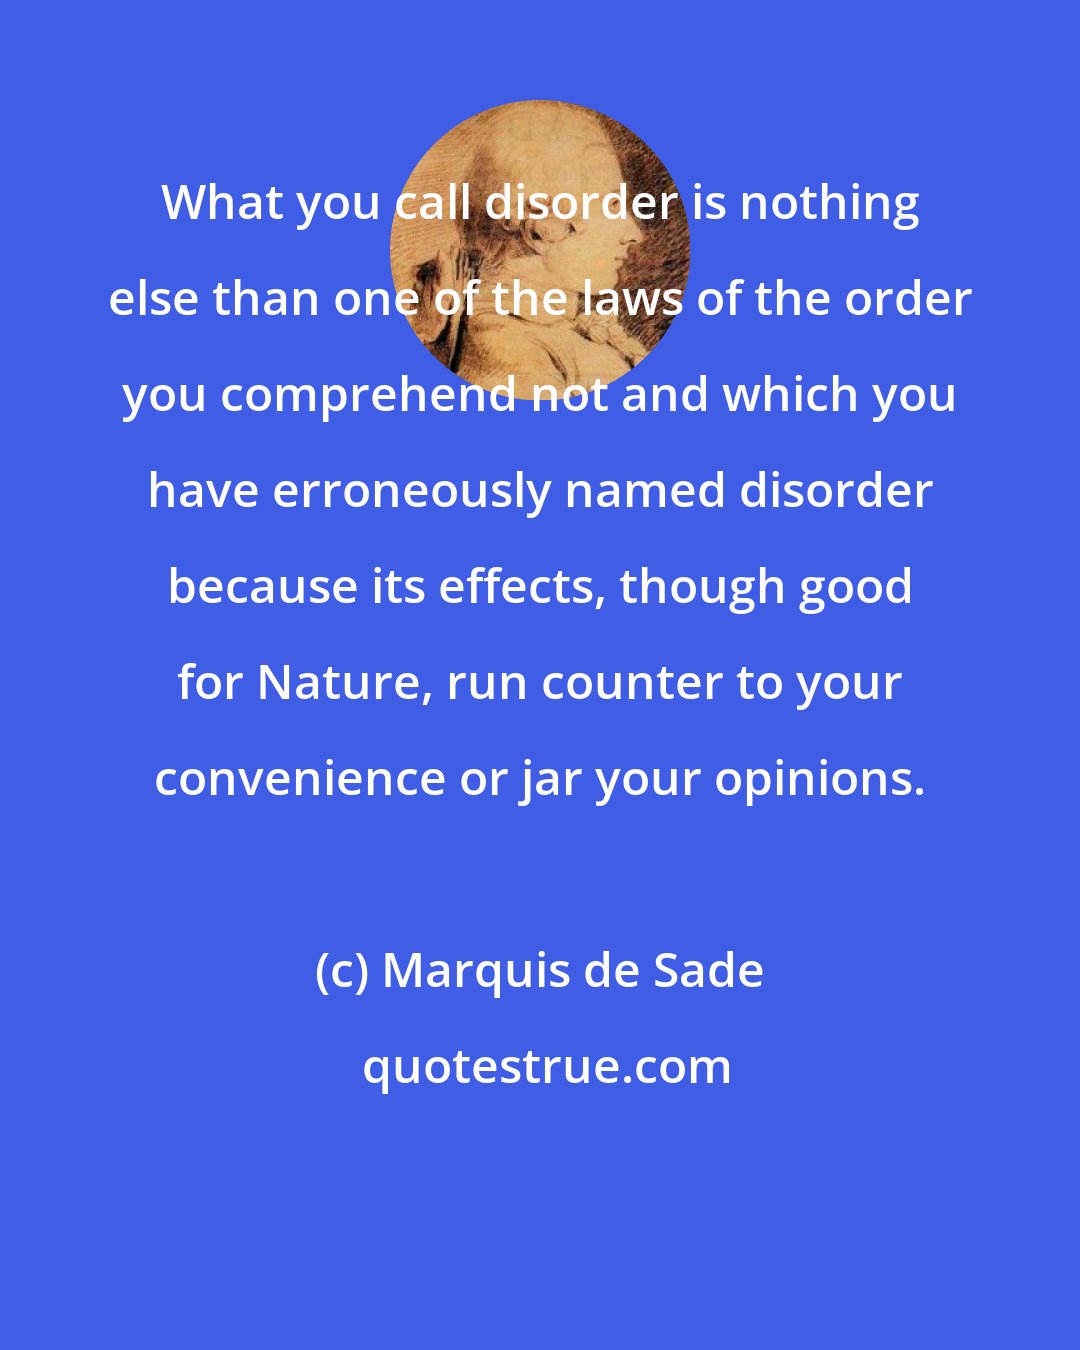 Marquis de Sade: What you call disorder is nothing else than one of the laws of the order you comprehend not and which you have erroneously named disorder because its effects, though good for Nature, run counter to your convenience or jar your opinions.